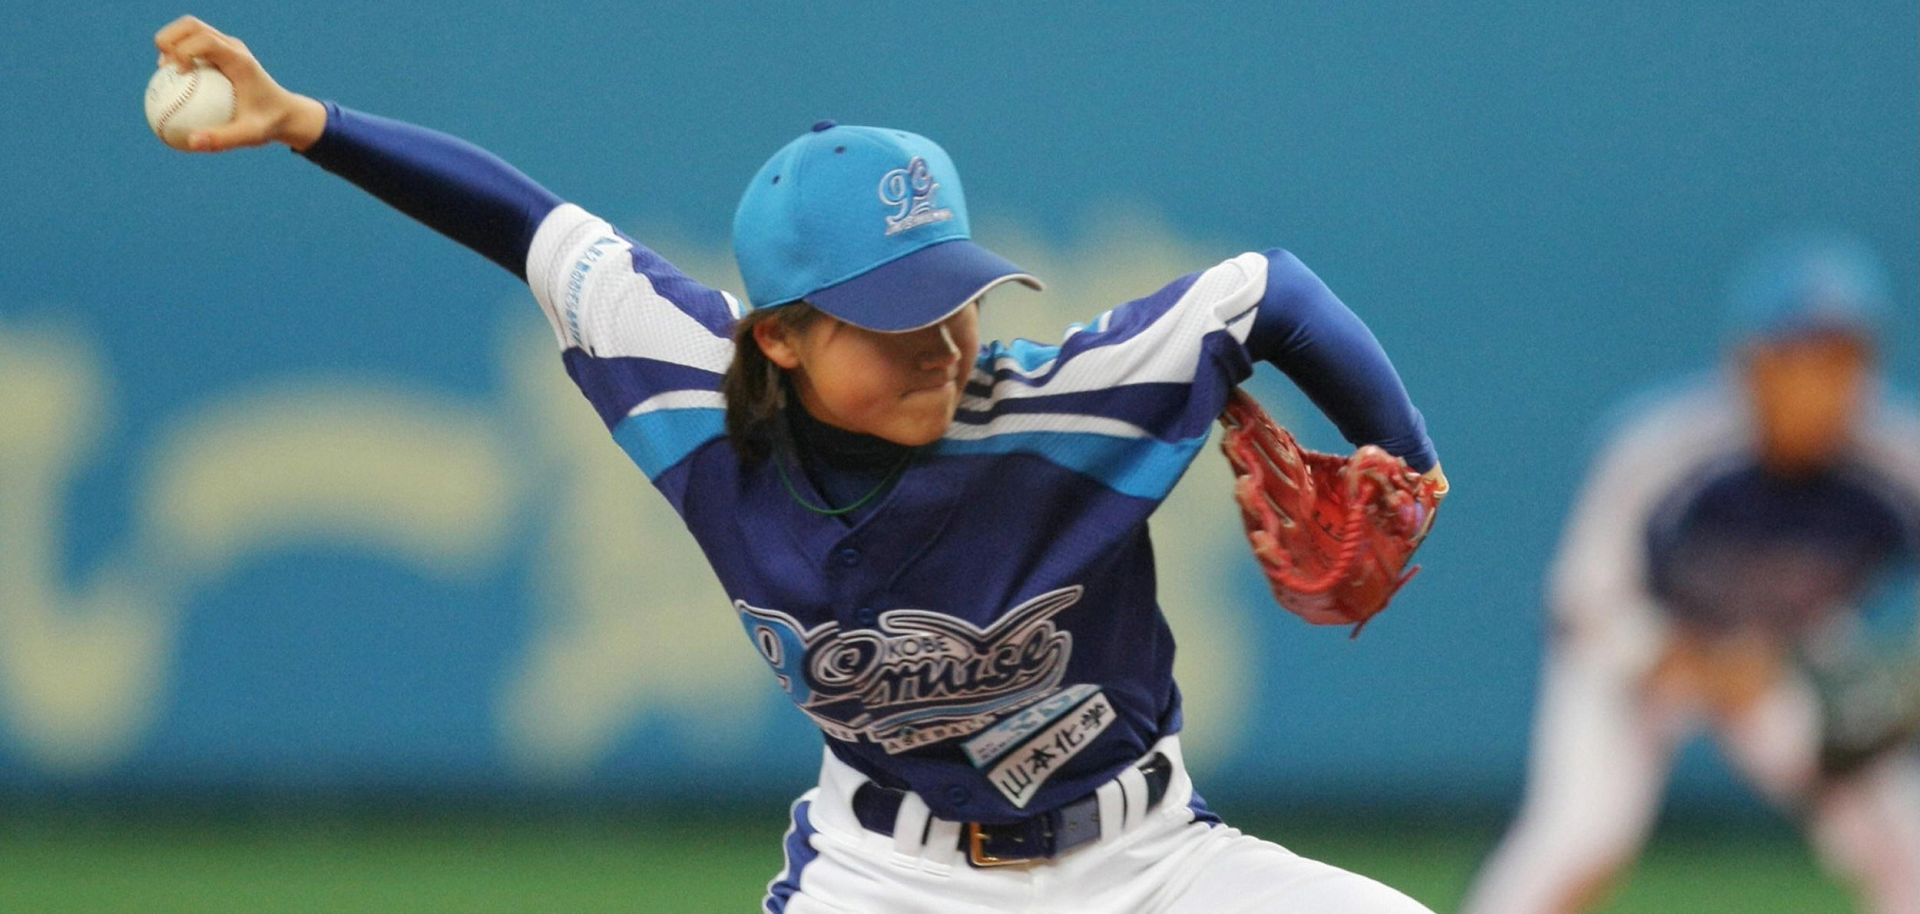 Seventeen-year-old schoolgirl Eri Yoshida became the first woman to play professional baseball with men in Japan when she took the mound at the weekend in a new independent league. 